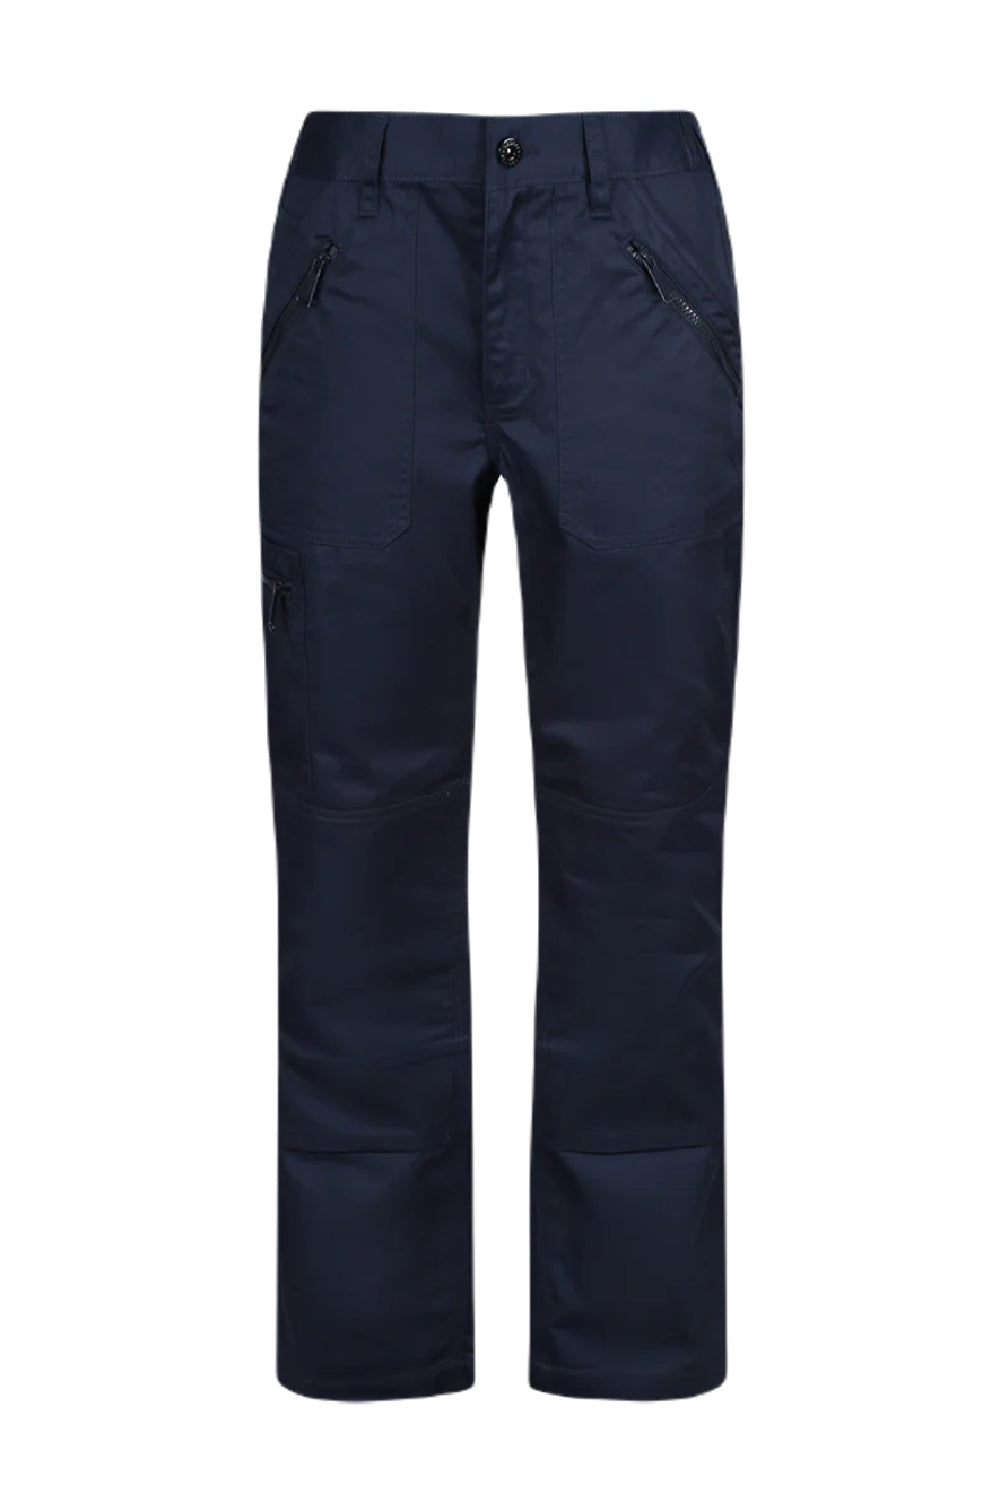 Regatta Womens Pro Action Trousers in Navy 